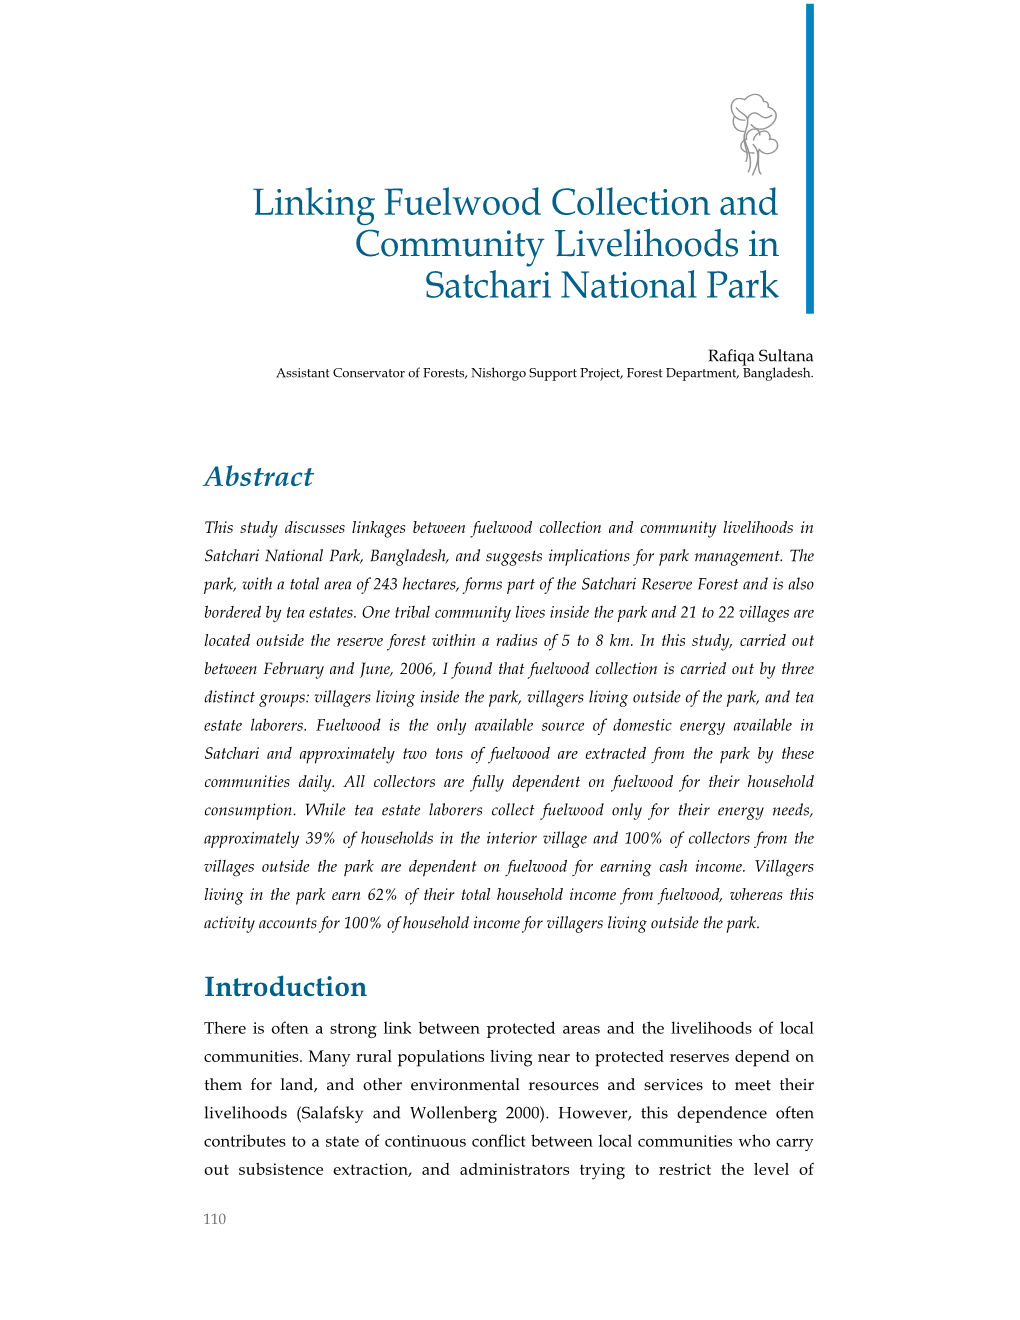 Paper 6. Linking Fuelwood Collection and Community Livelihoods In